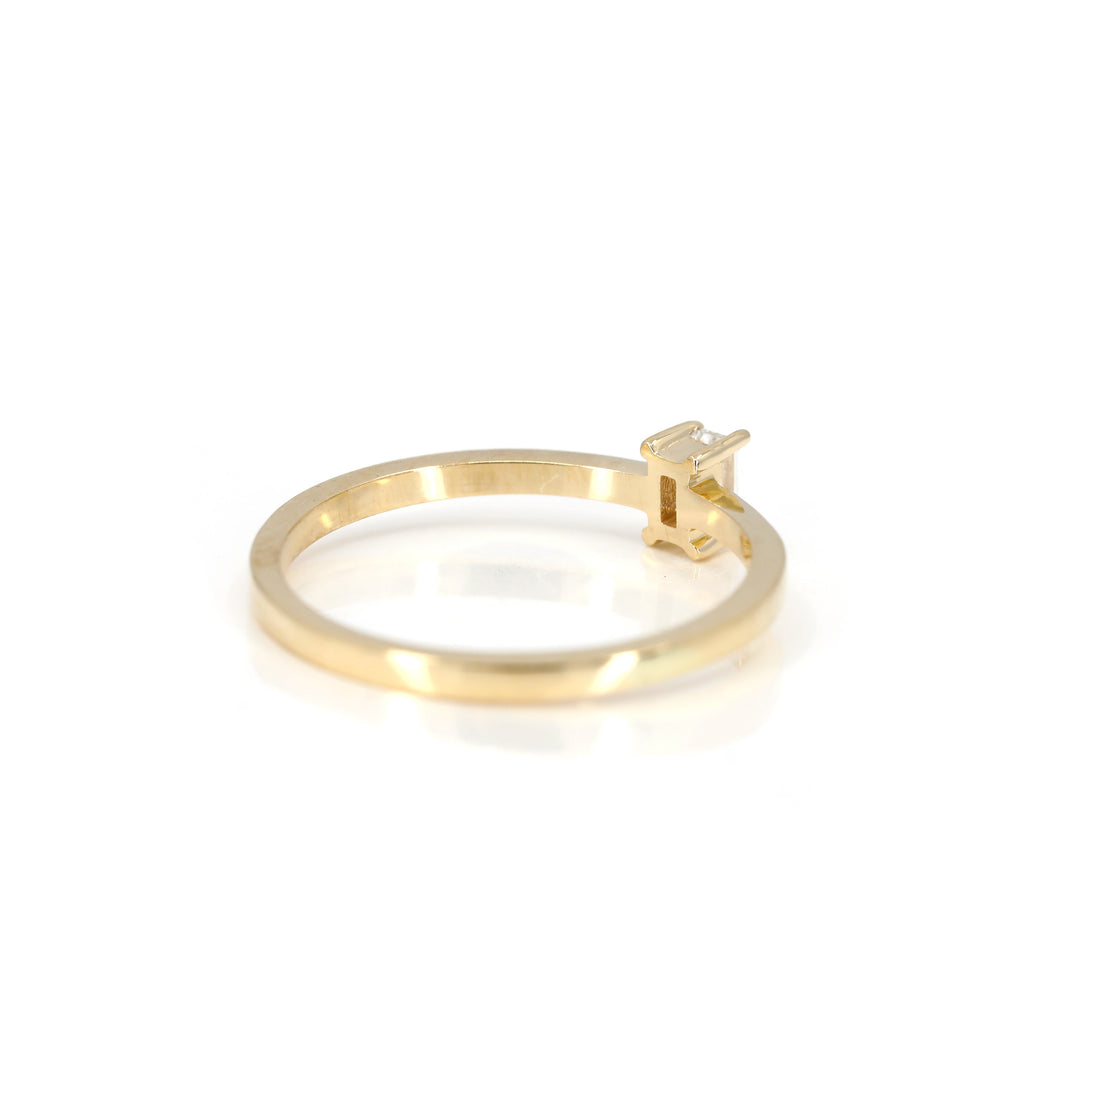 back view of a boxy yellow gold wedding band custom made in montreal by bena jewelry designer on white background